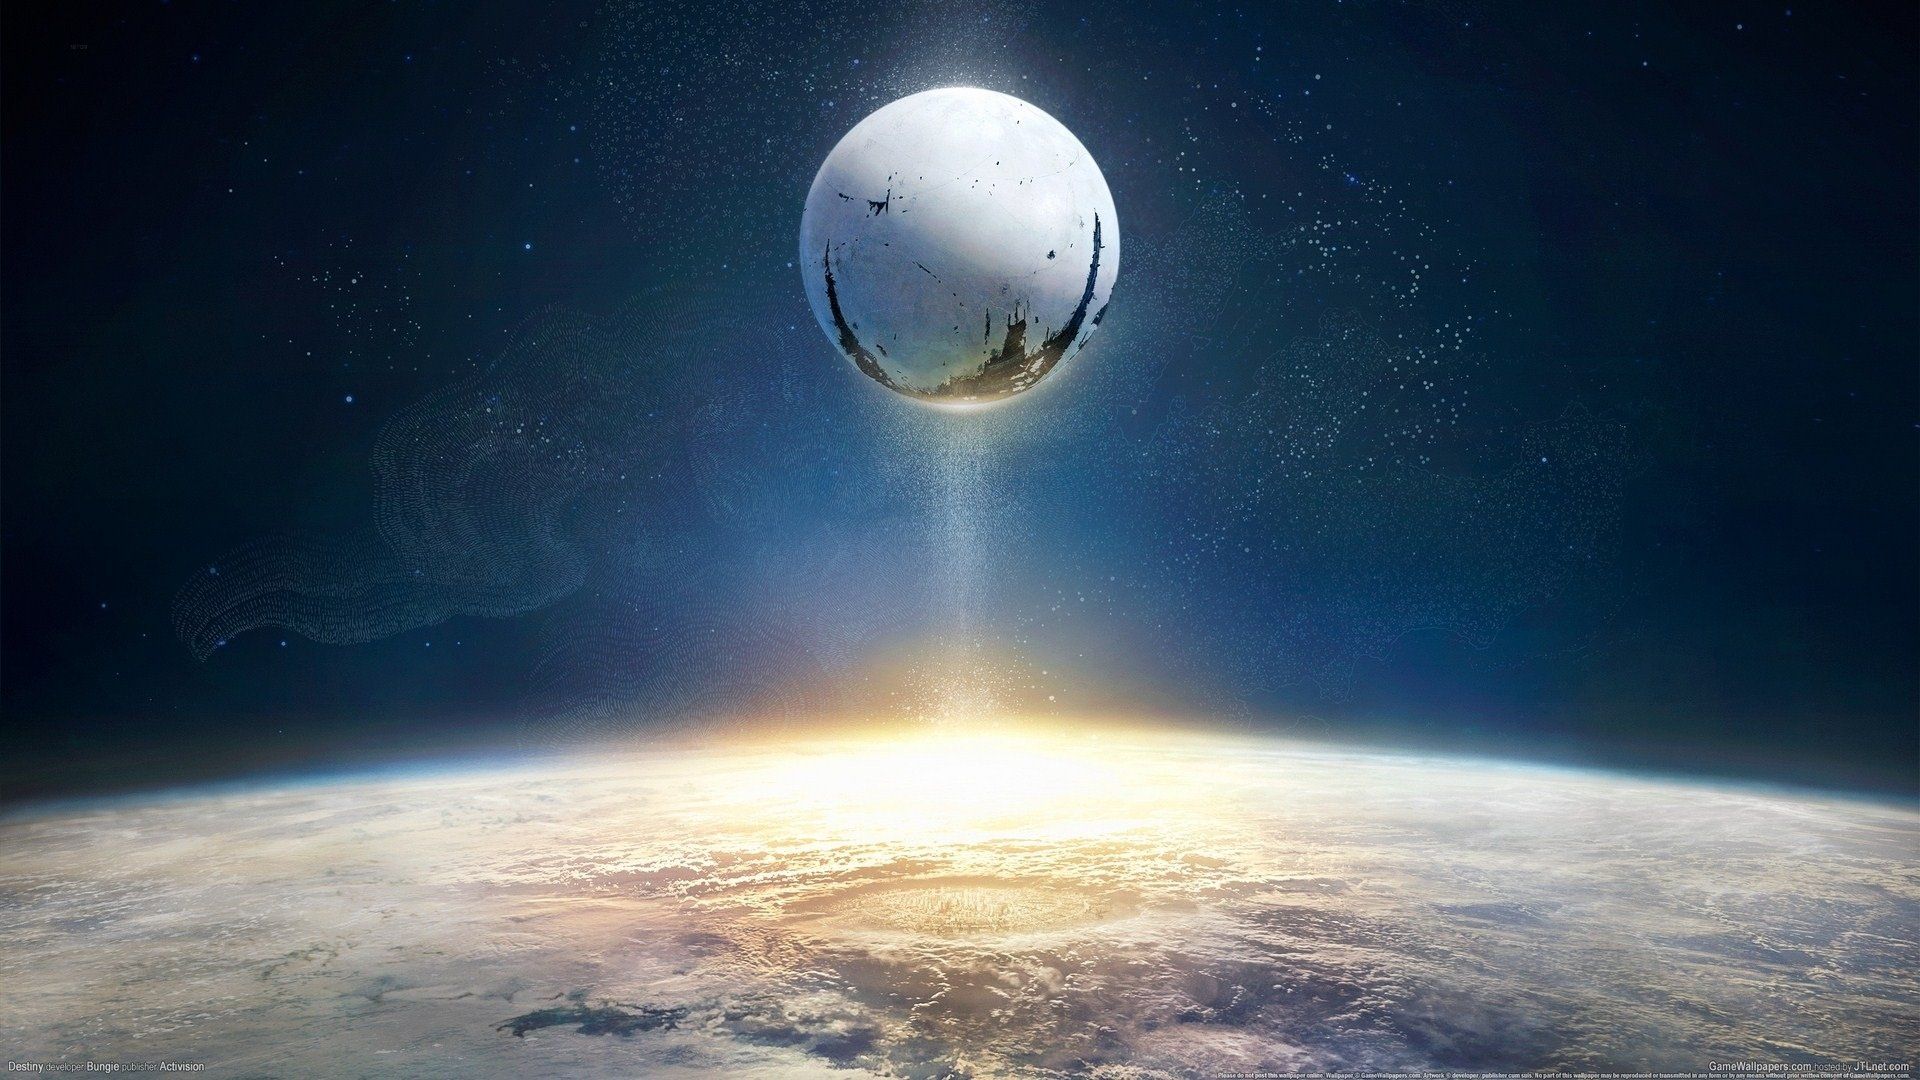 Destiny Maps (actual real maps of all planets & VoG)